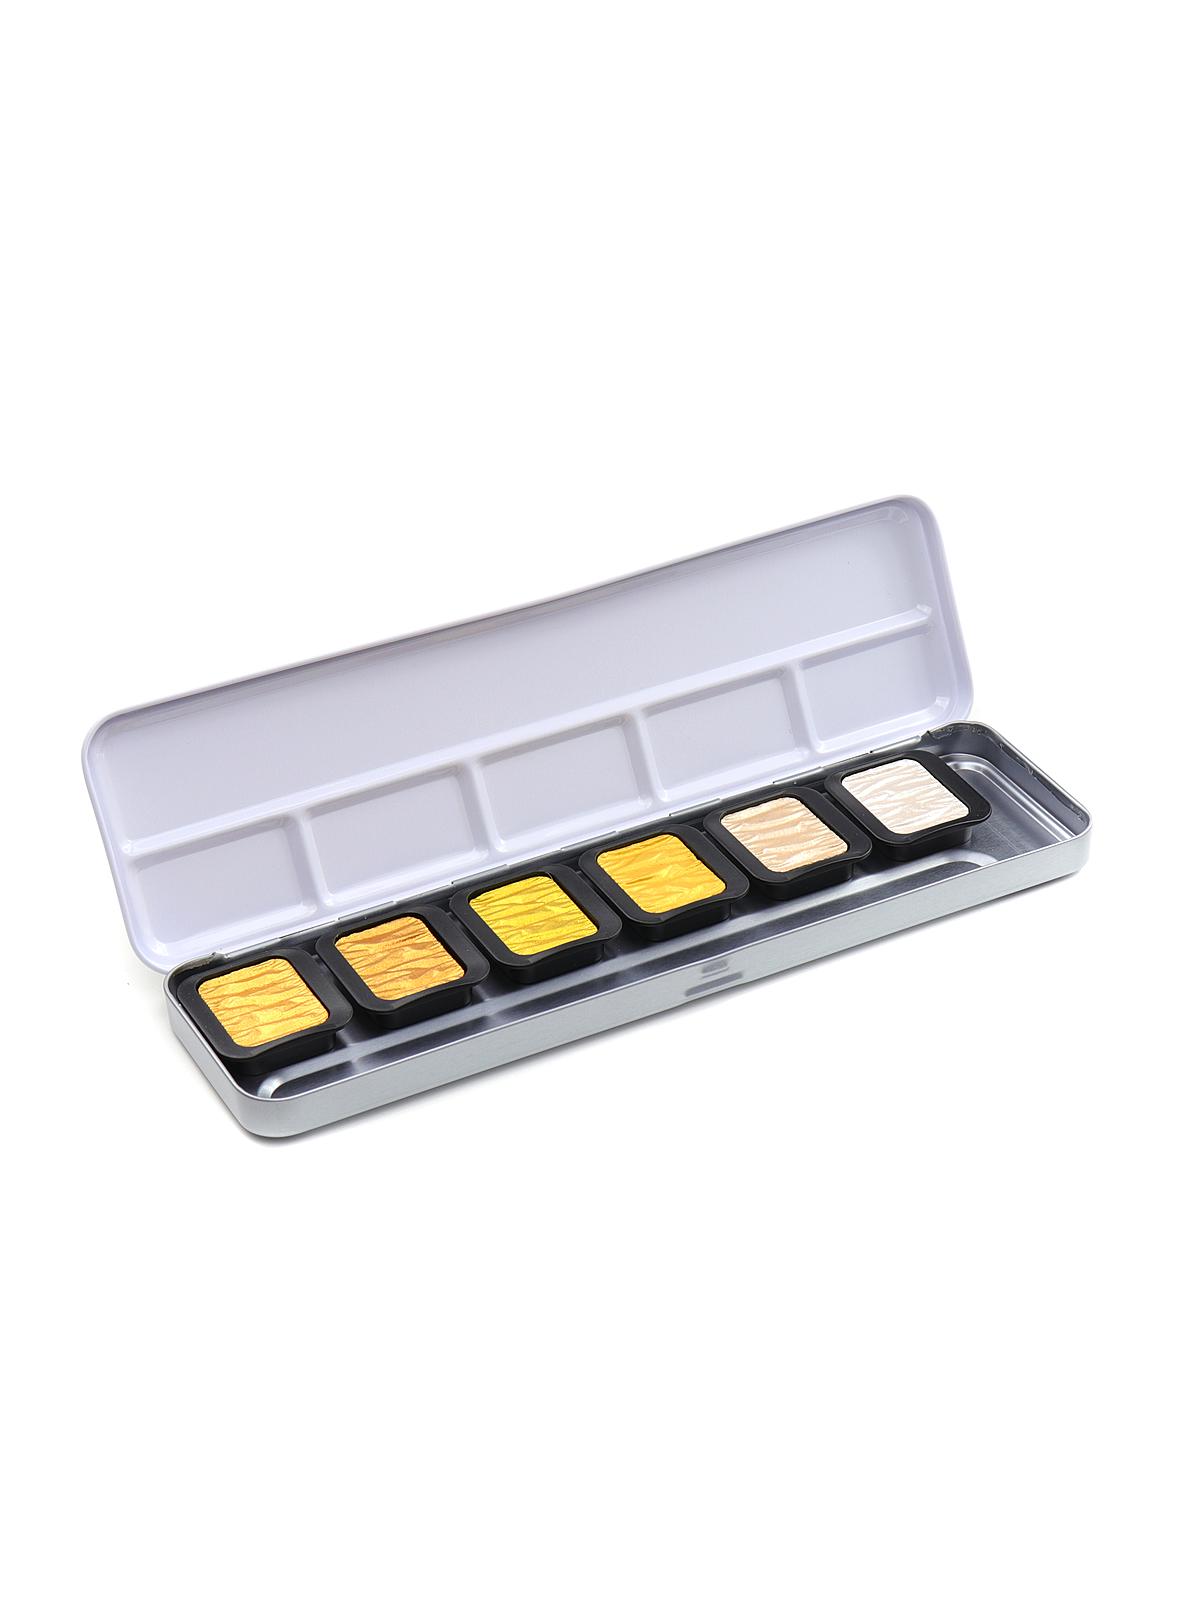 Pearlescent Colors In A Metal Box Classic Pack Of 6